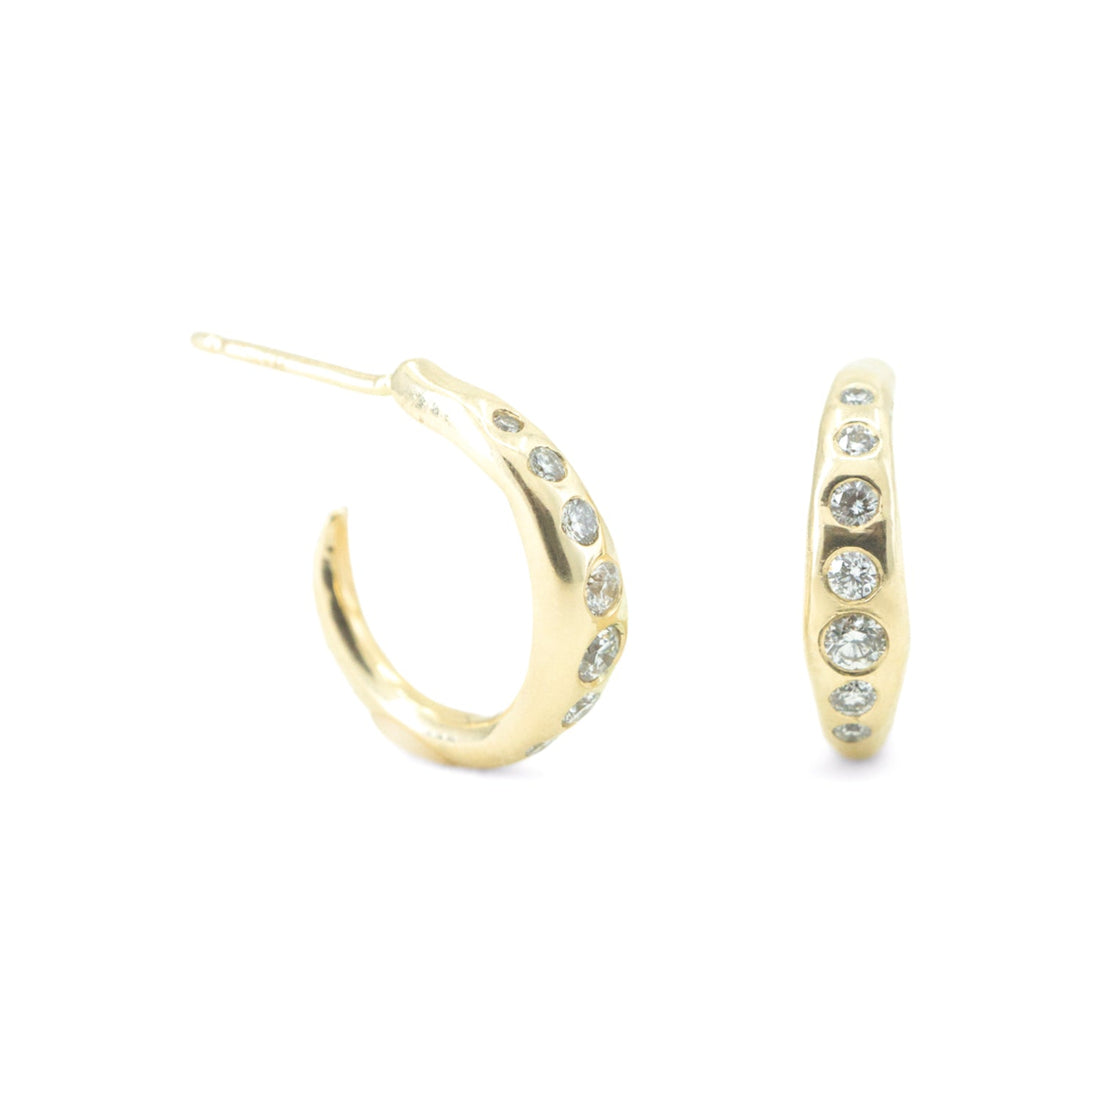 Journey Hoops in 14k gold and diamond accents by Erin Cuff Jewelry.